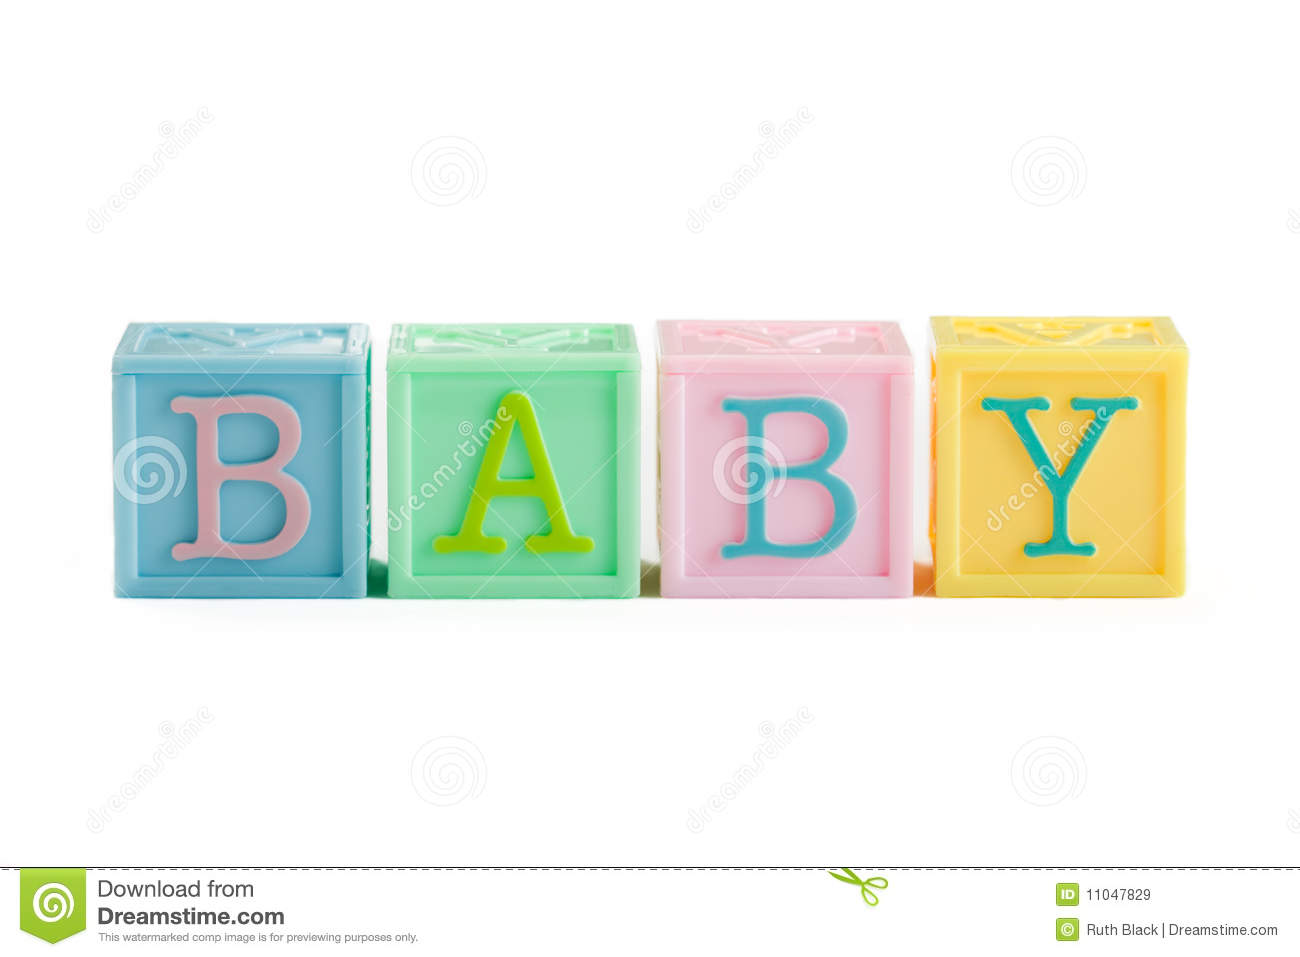 Baby Building Blocks Royalty Free Stock Images   Image  11047829